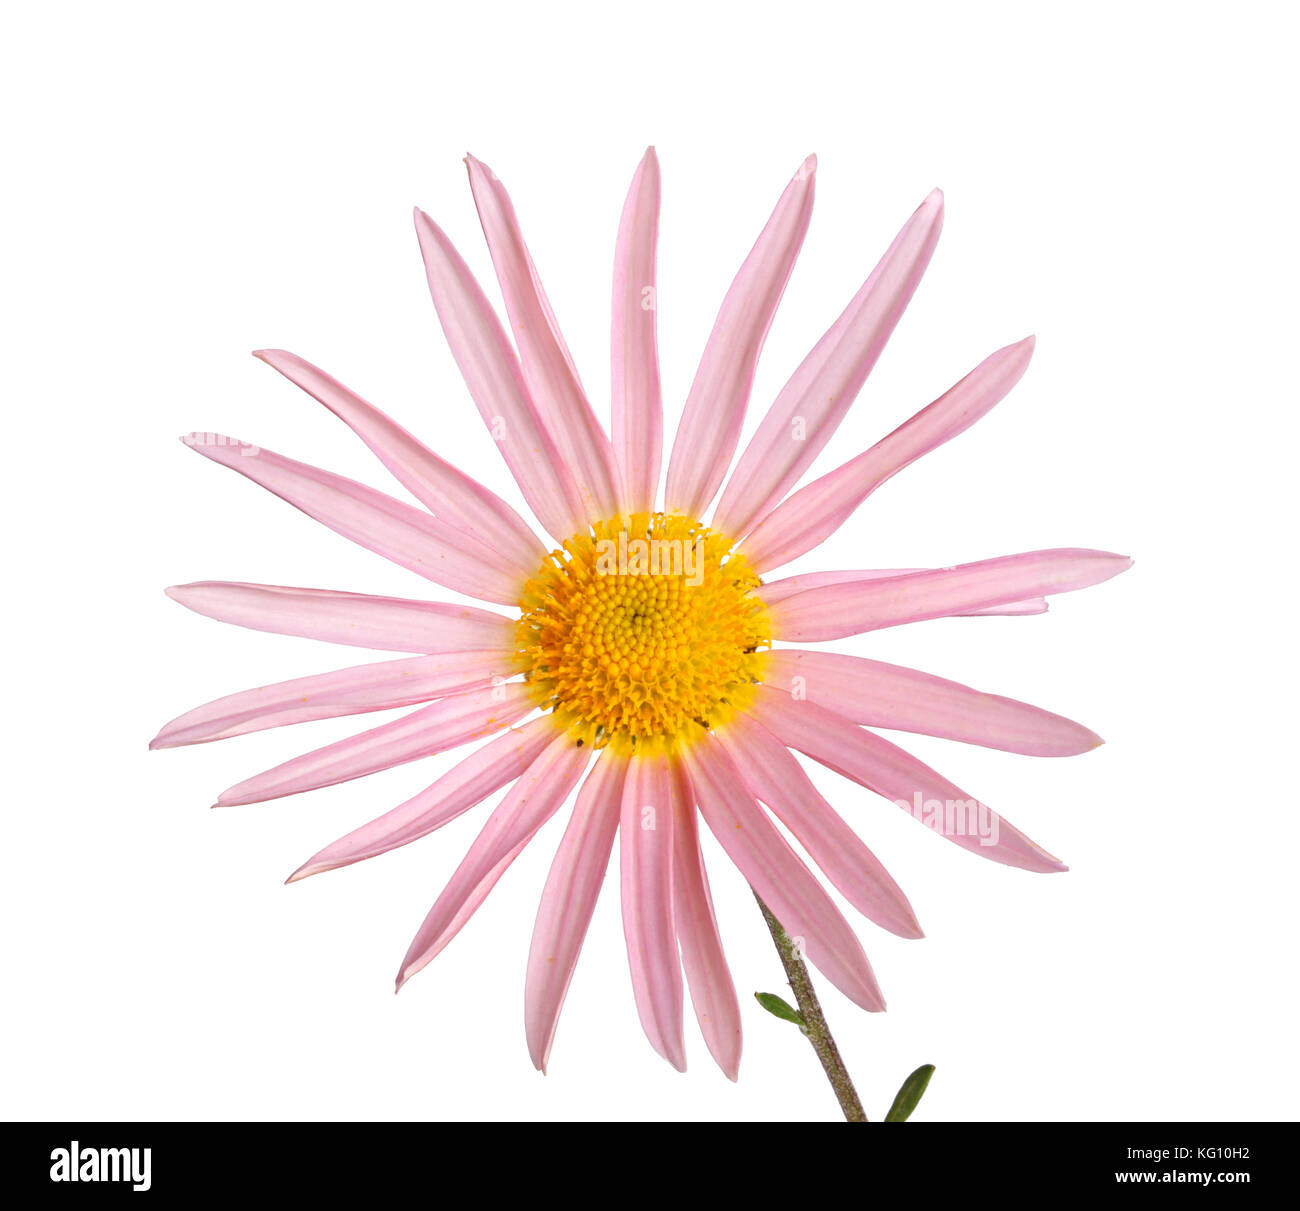 Single stem with a pink and yellow flower of the hardy chrysanthemum (Chrysanthemum rubellum) isolated against a white background Stock Photo